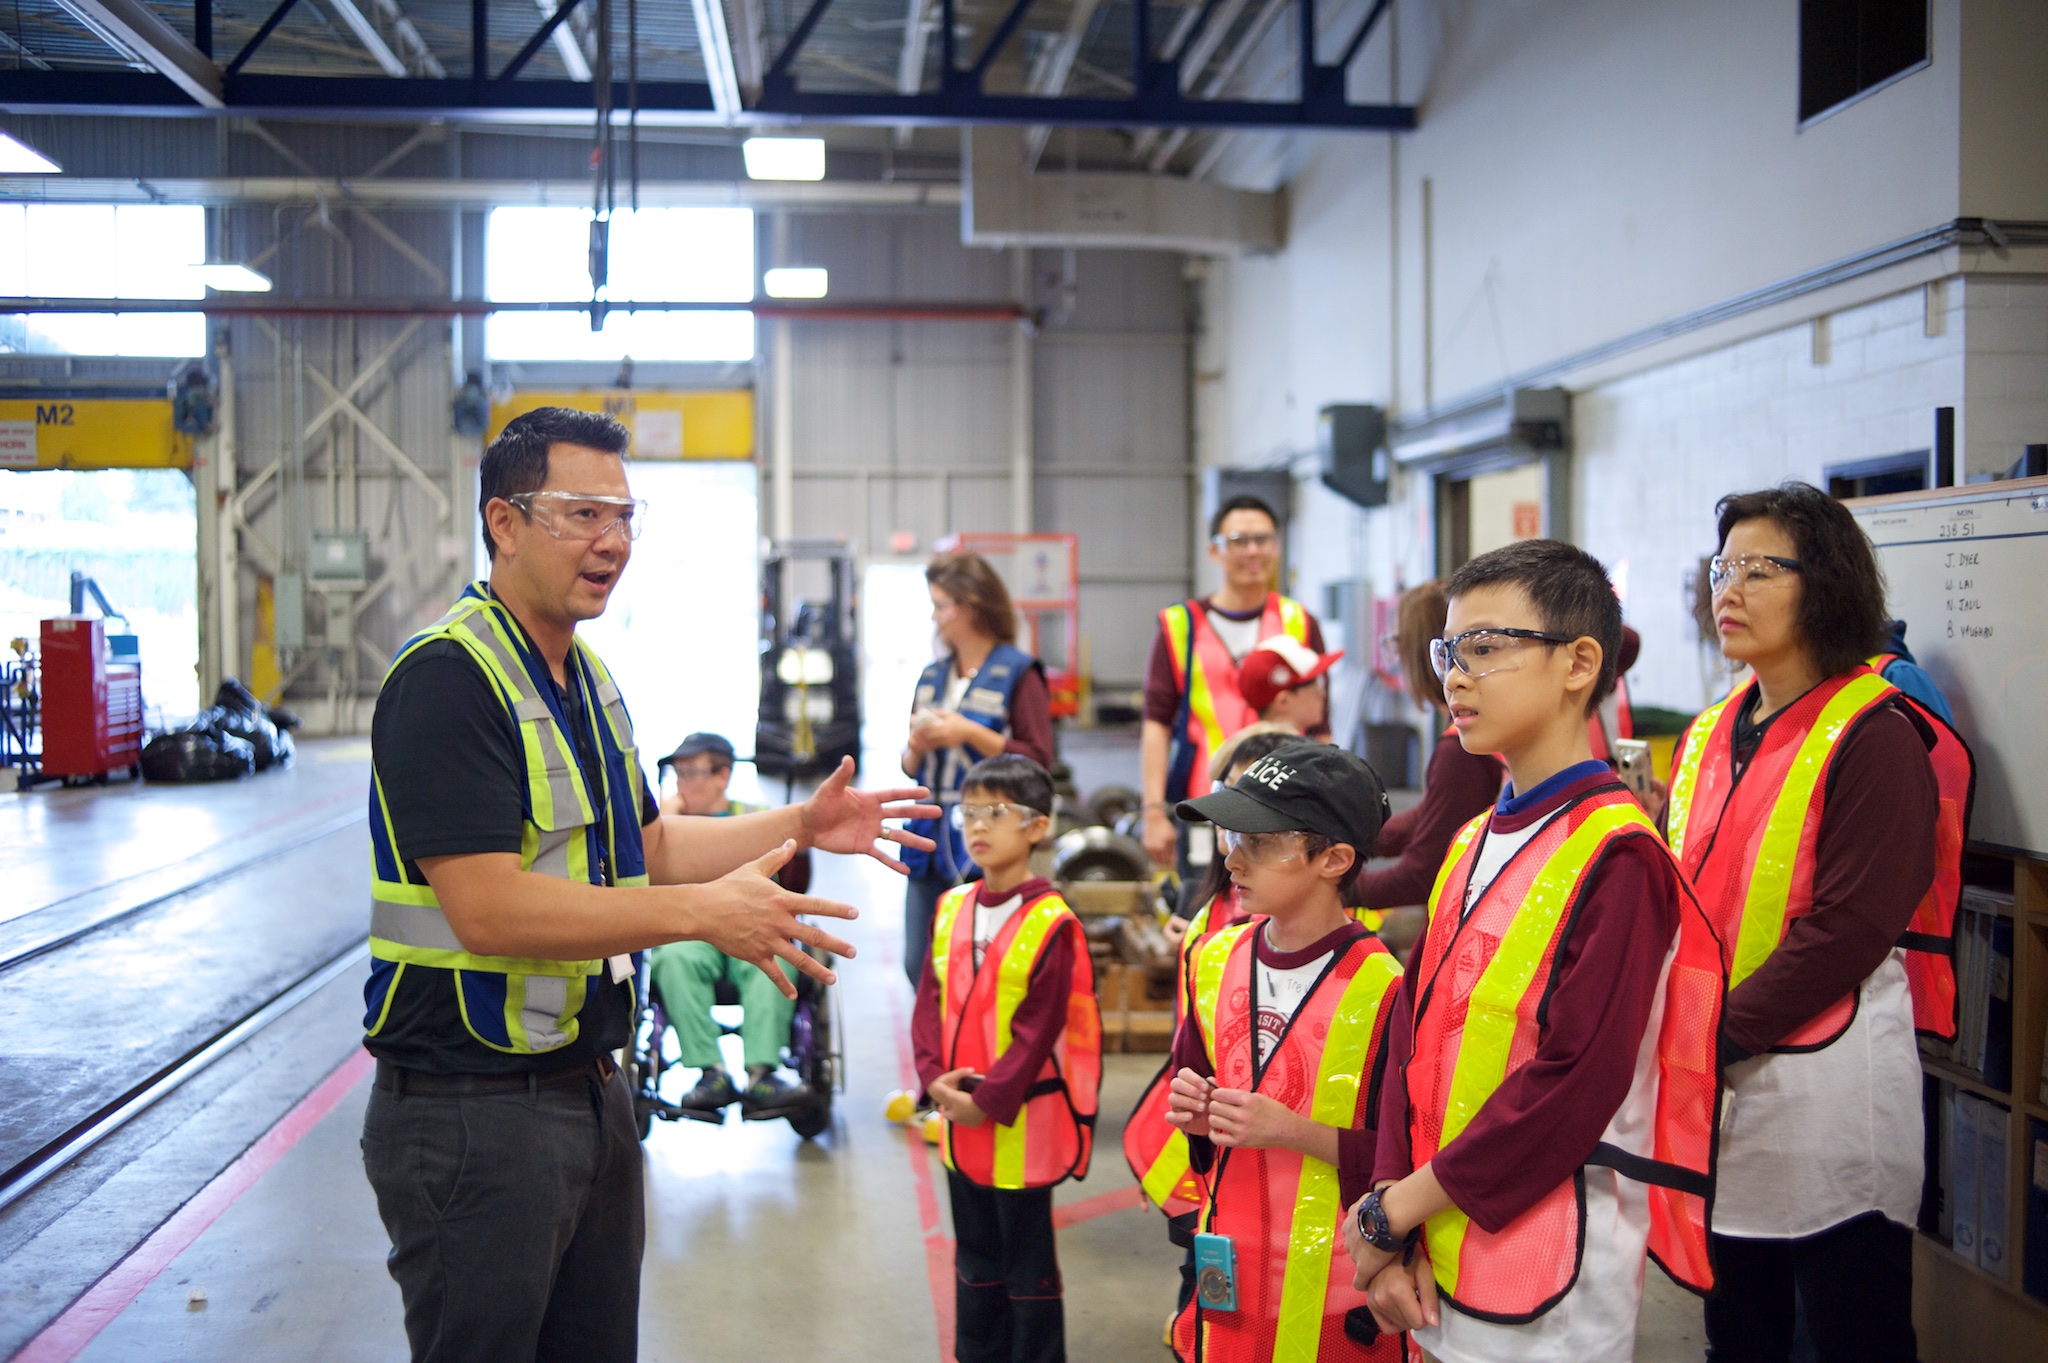 Campers visited the repair yard for SkyTrains!